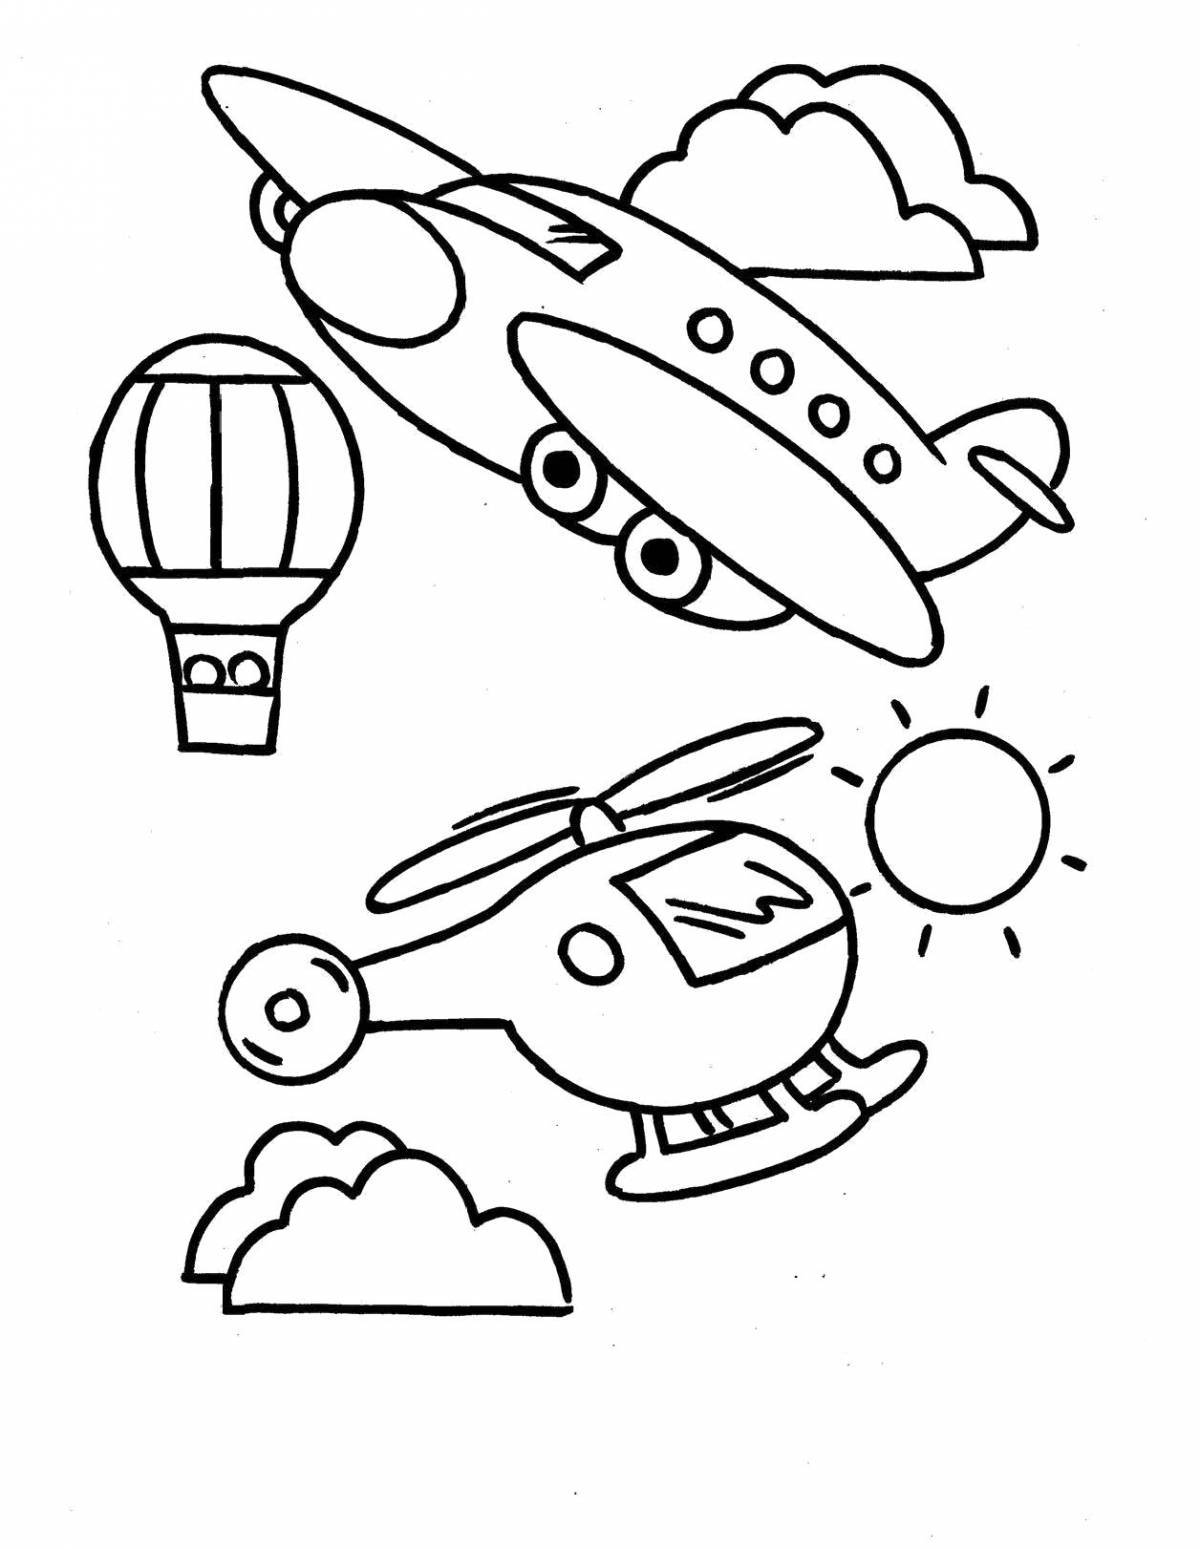 Exciting airplane coloring book for 3-4 year olds